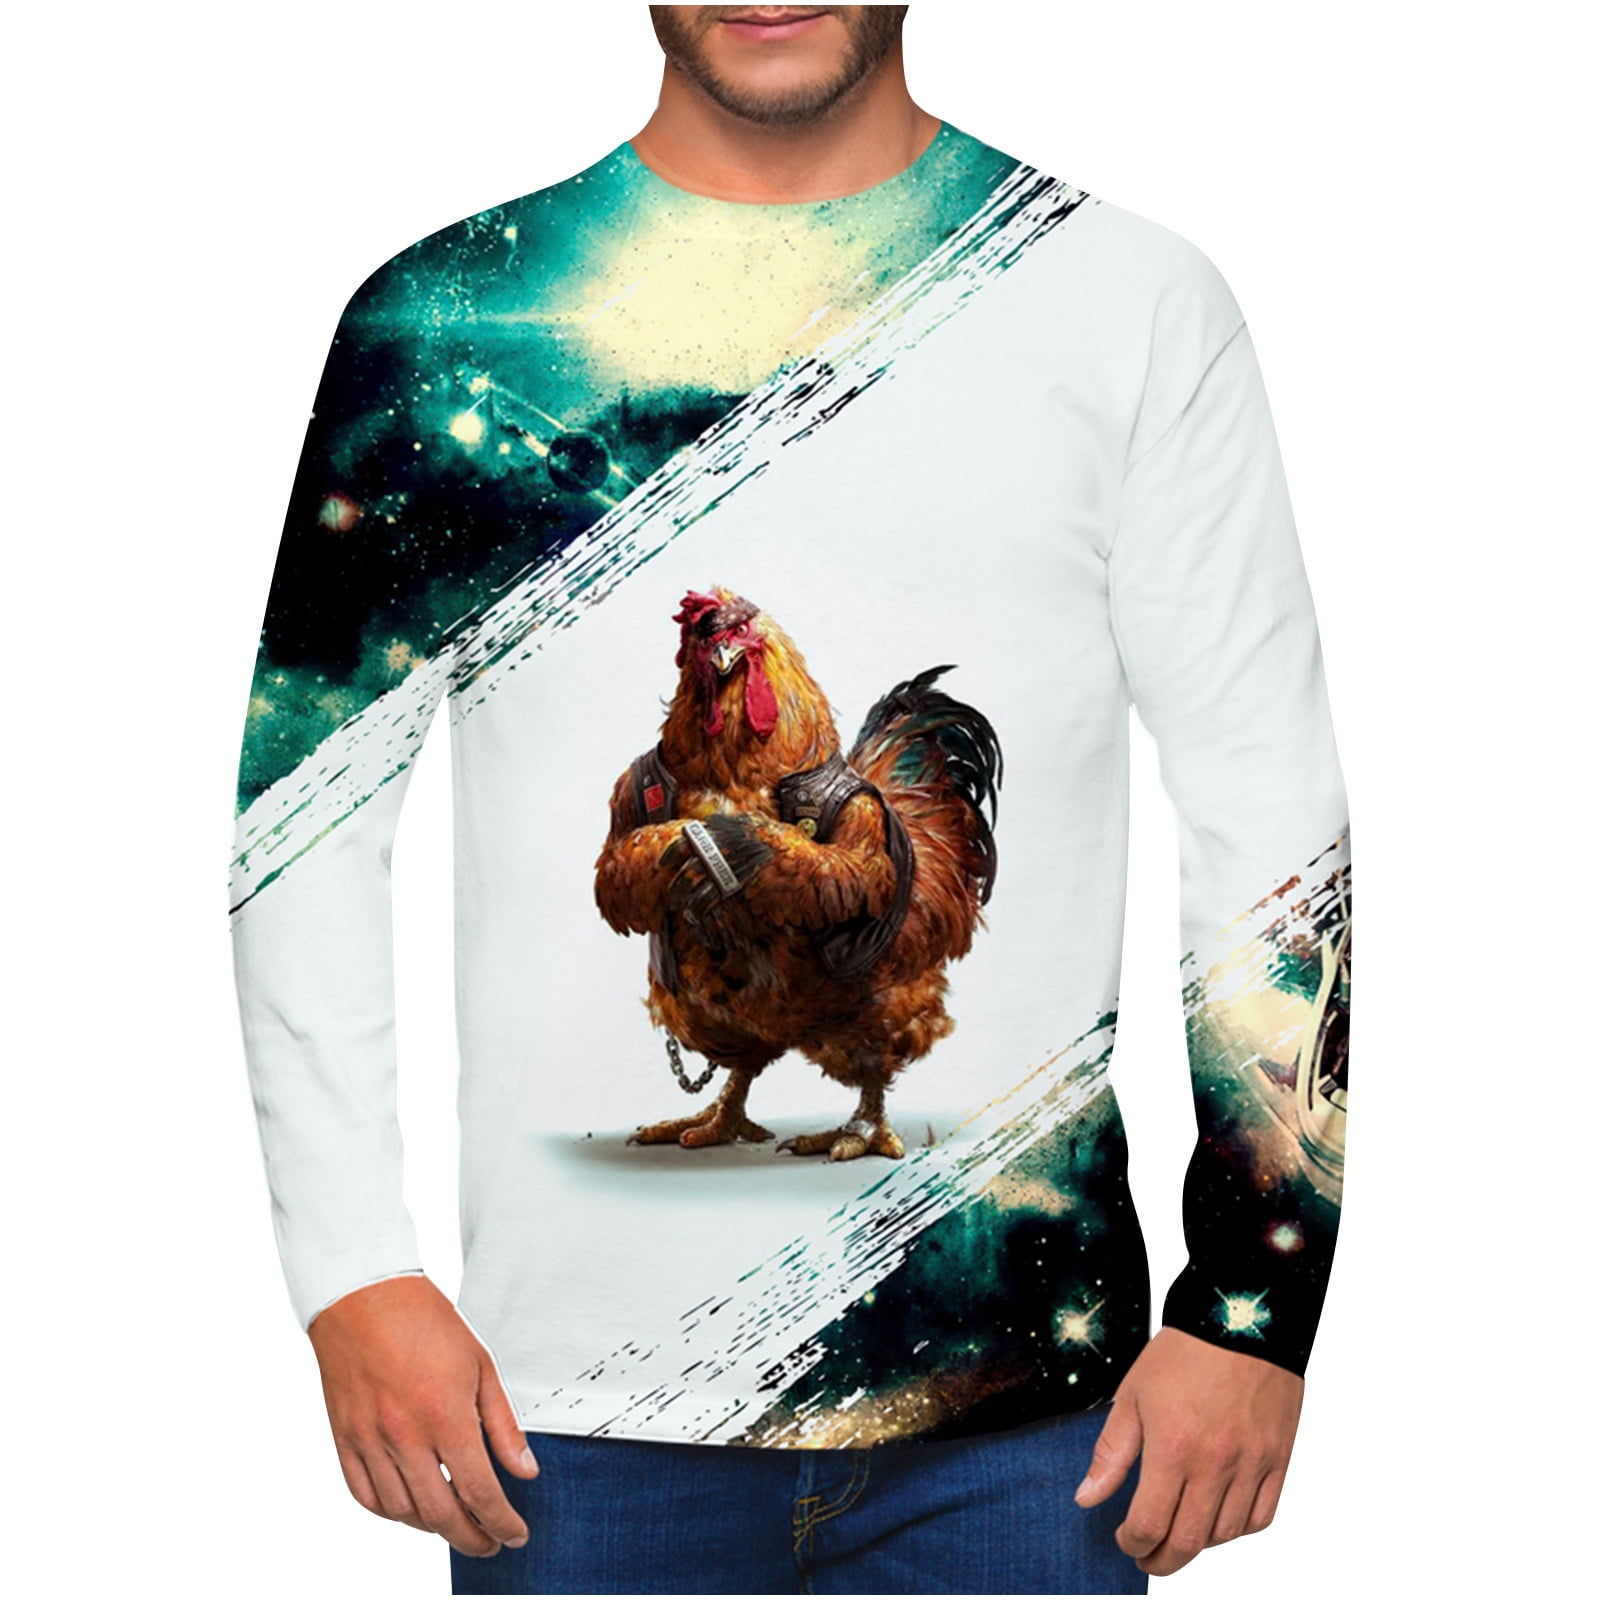 jsaierl Long Sleeve Shirts for Men 3D Chicken Graphic Top Casual